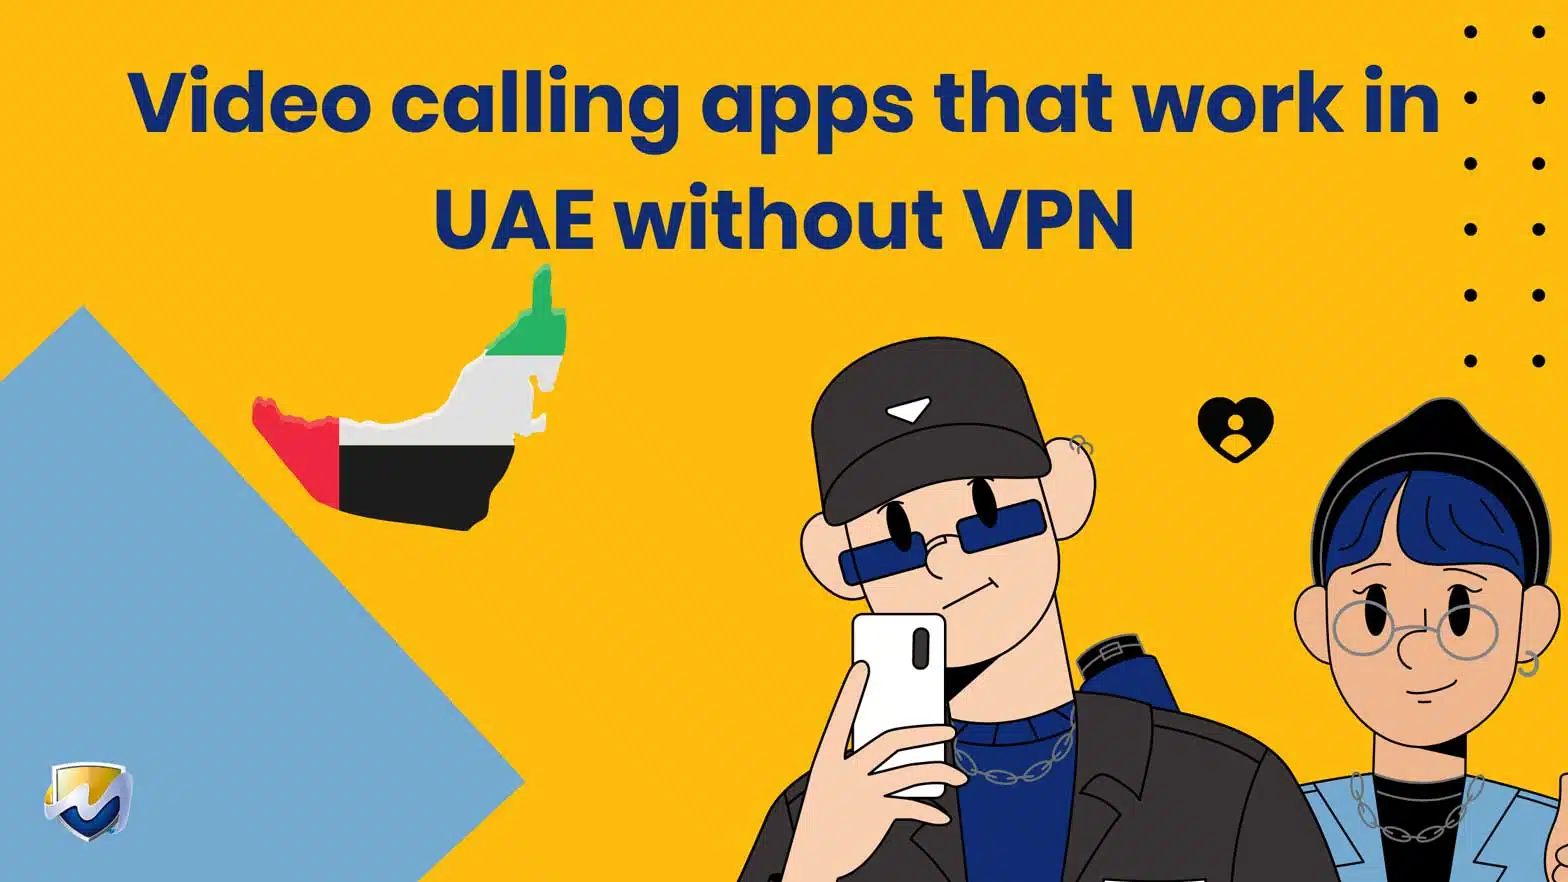 Video calling apps that work in UAE without VPN